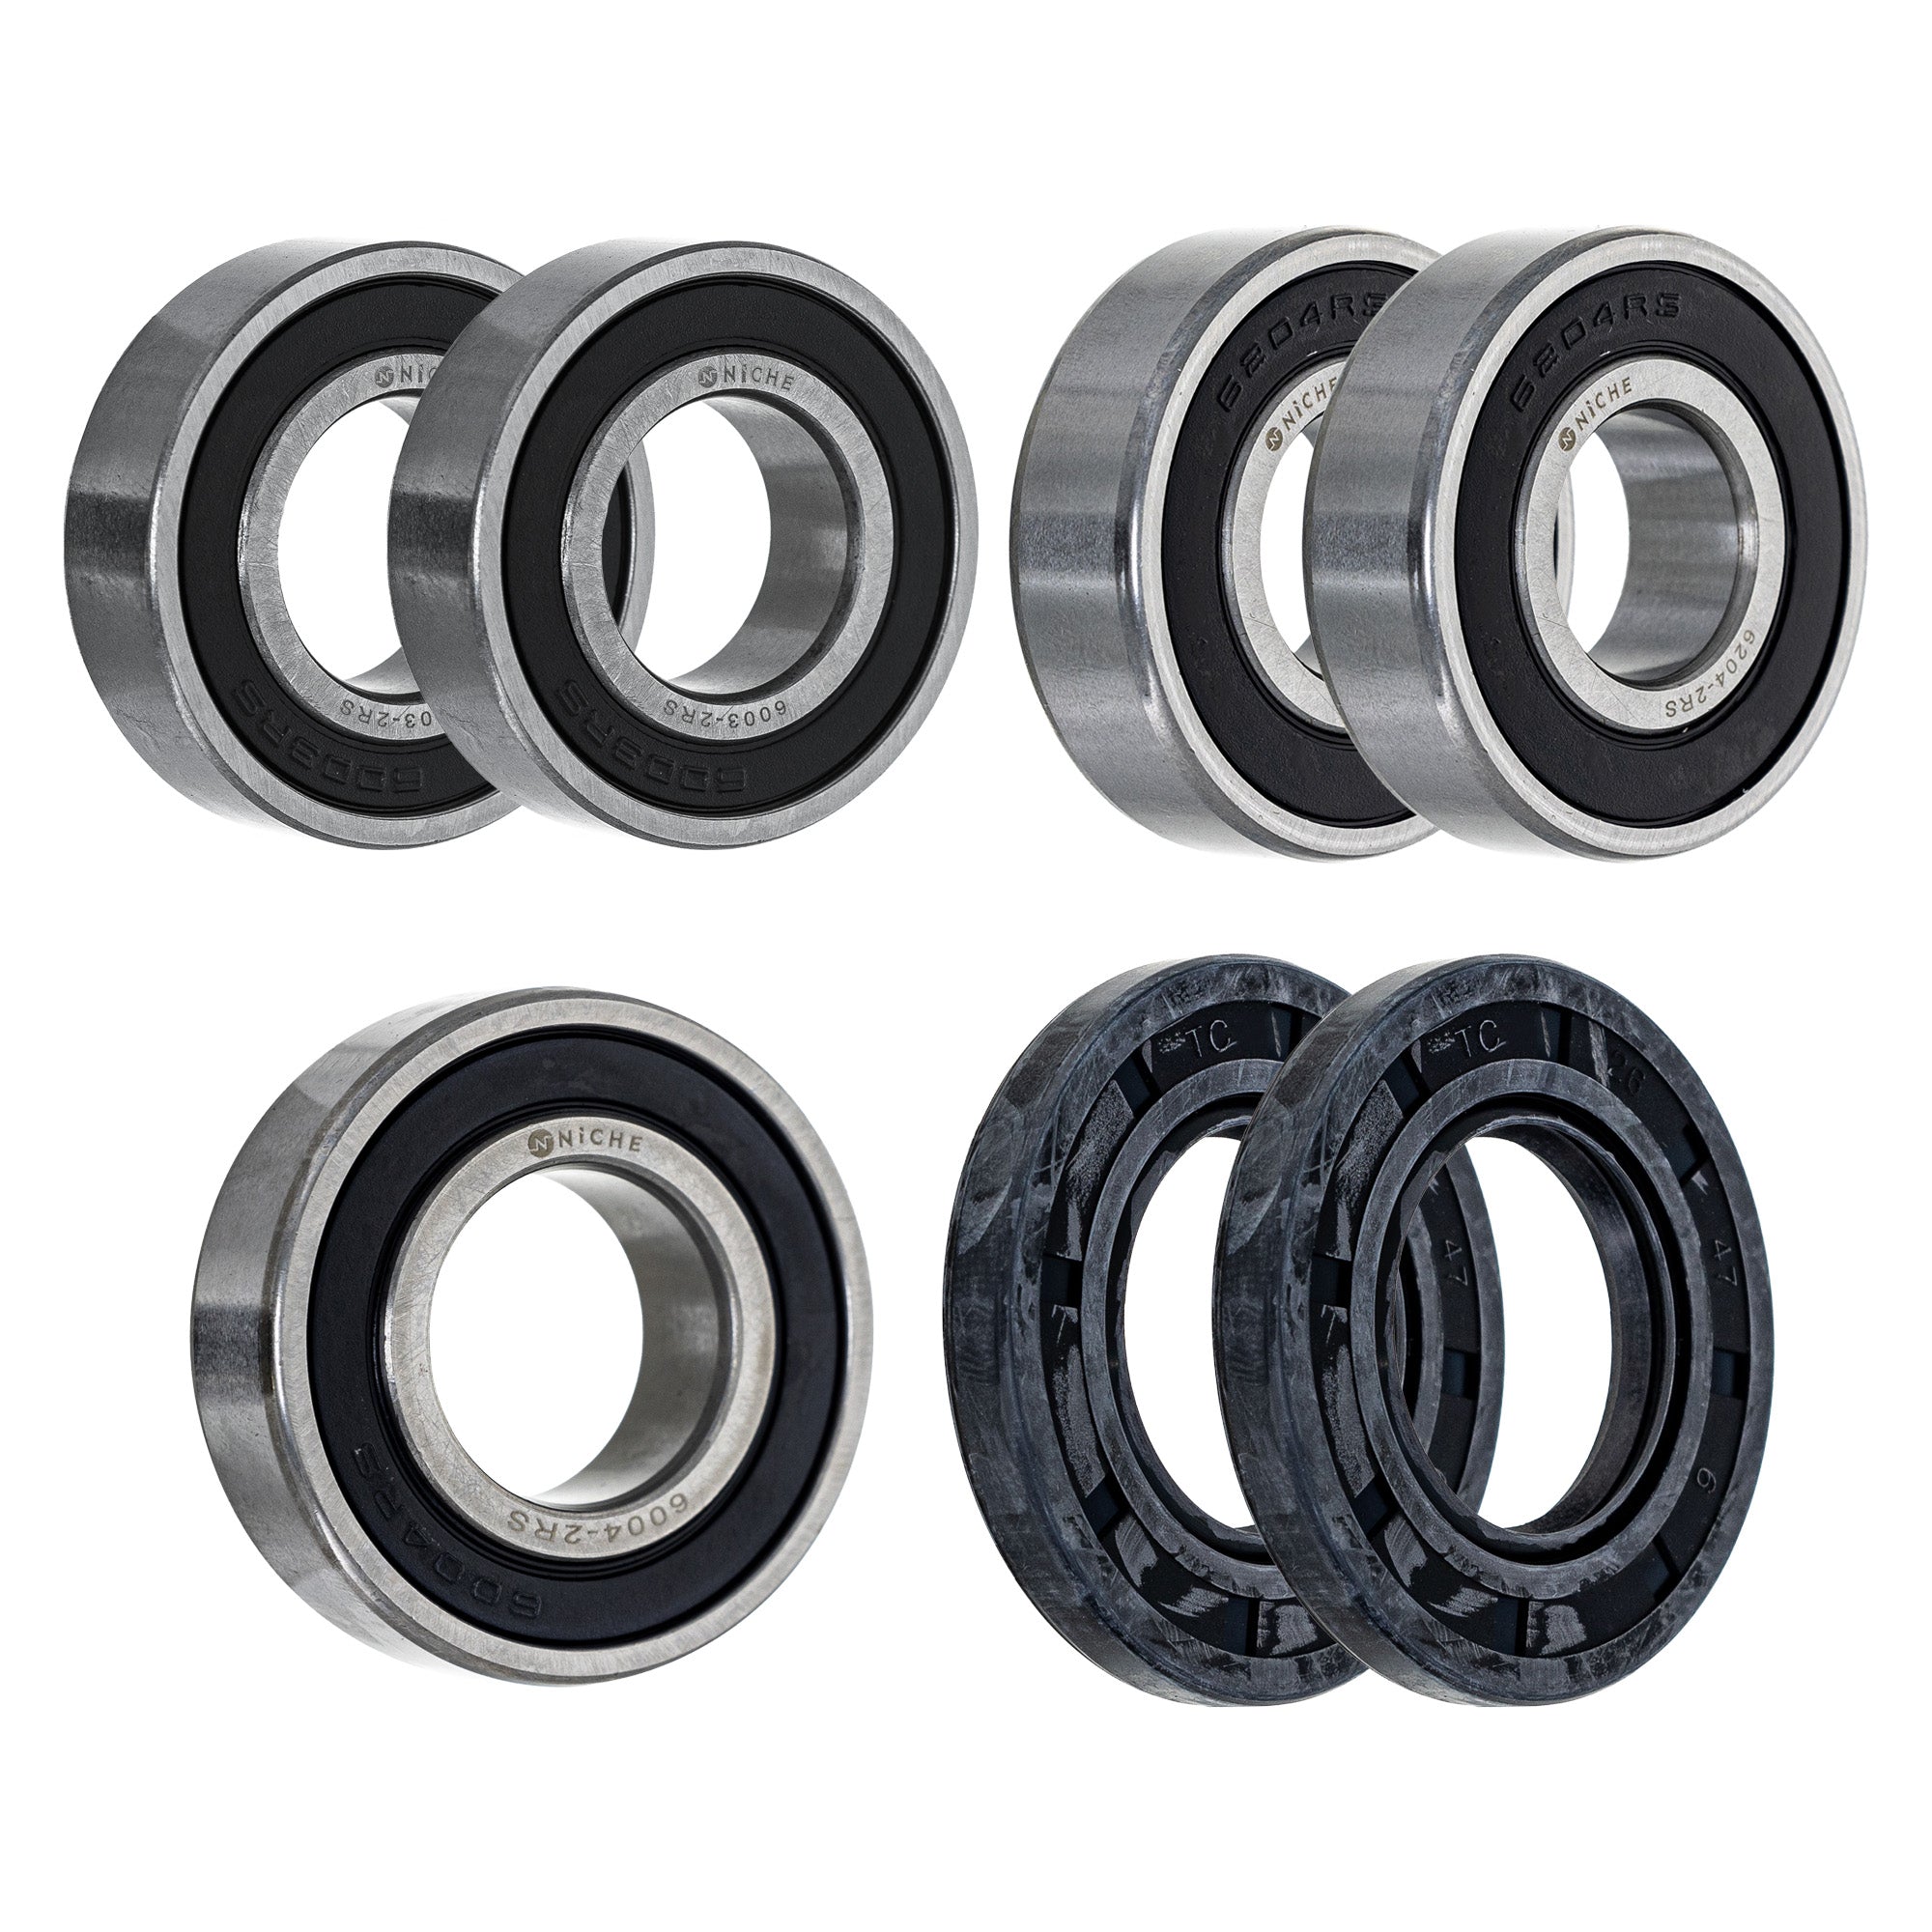 Wheel Bearing Seal Kit for zOTHER Ref No RM250 NICHE MK1008750